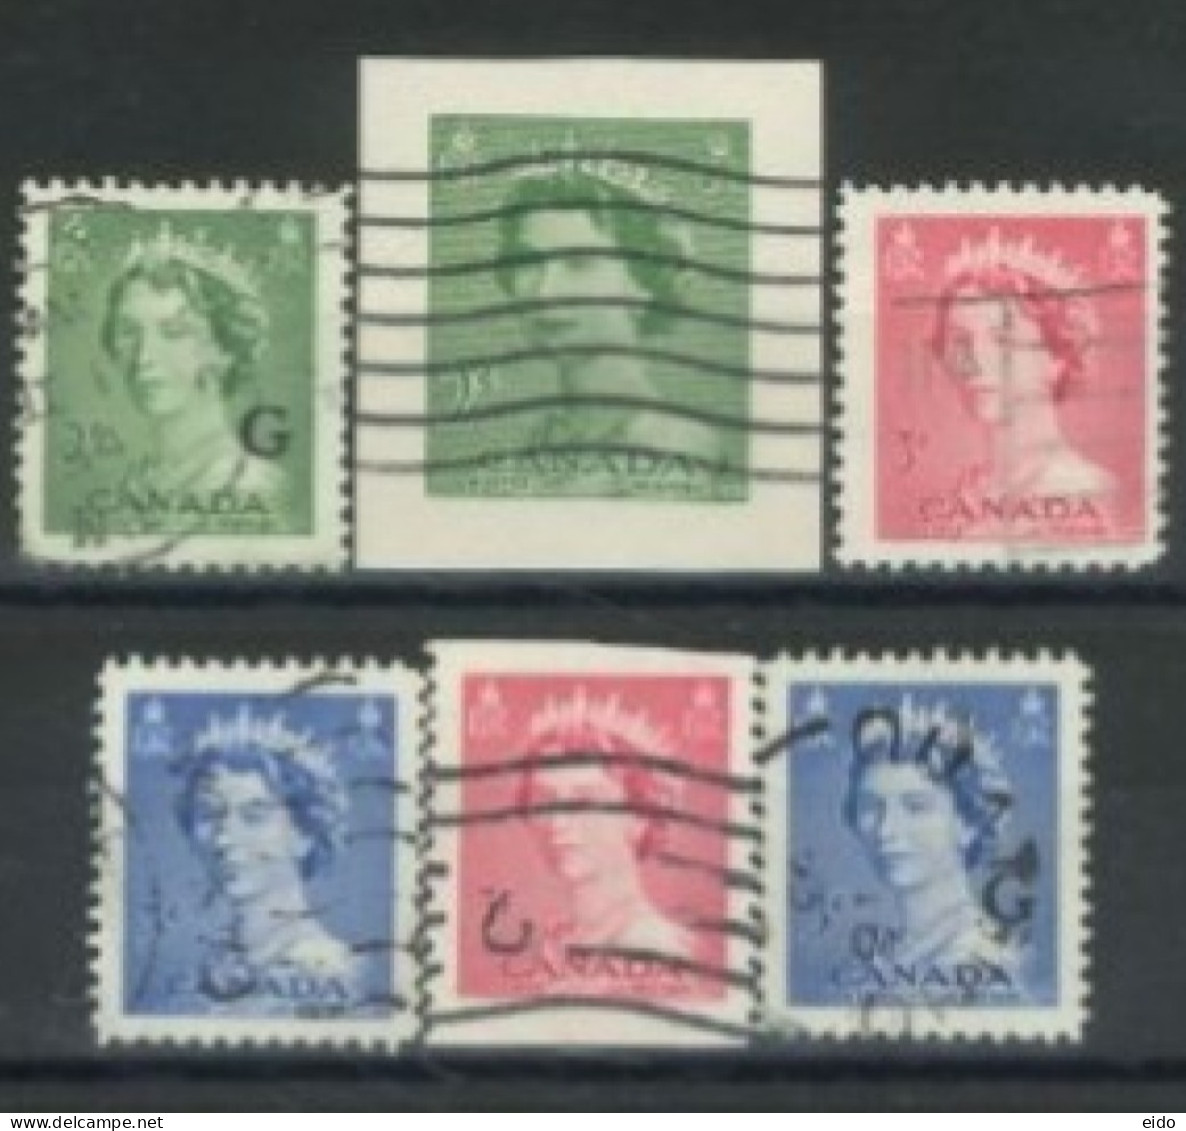 CANADA - 1953, QUEEN ELIZABETH II STAMPS SET OF 6, USED. - Used Stamps